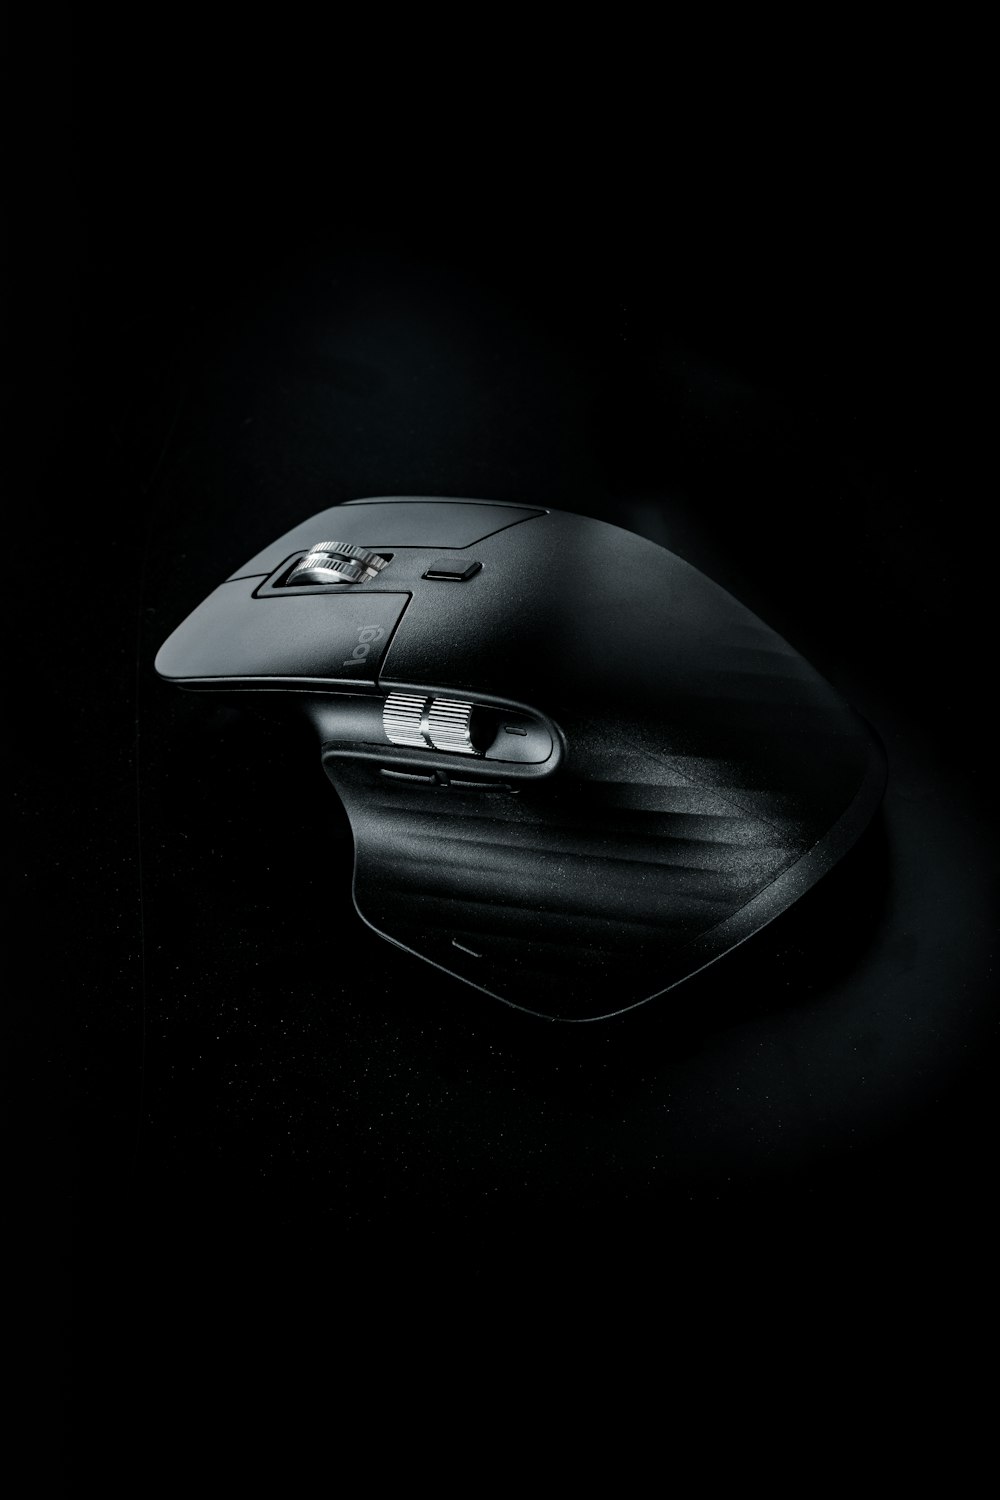 black and gray cordless computer mouse photo – Free Computer Image on ...